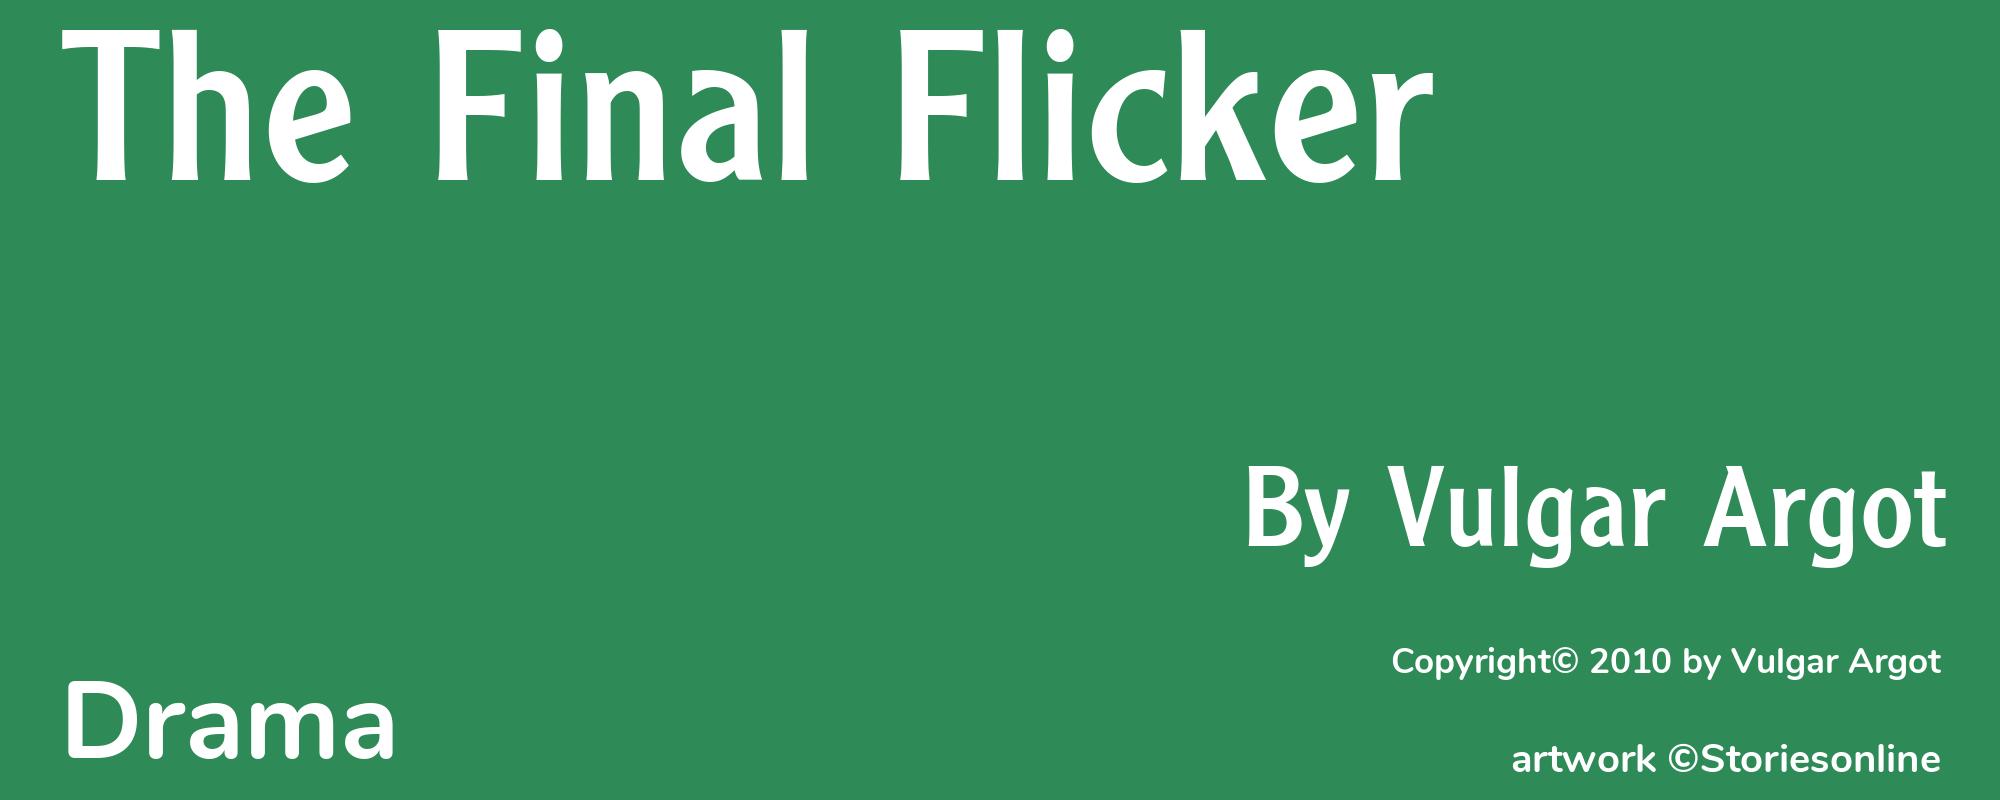 The Final Flicker - Cover